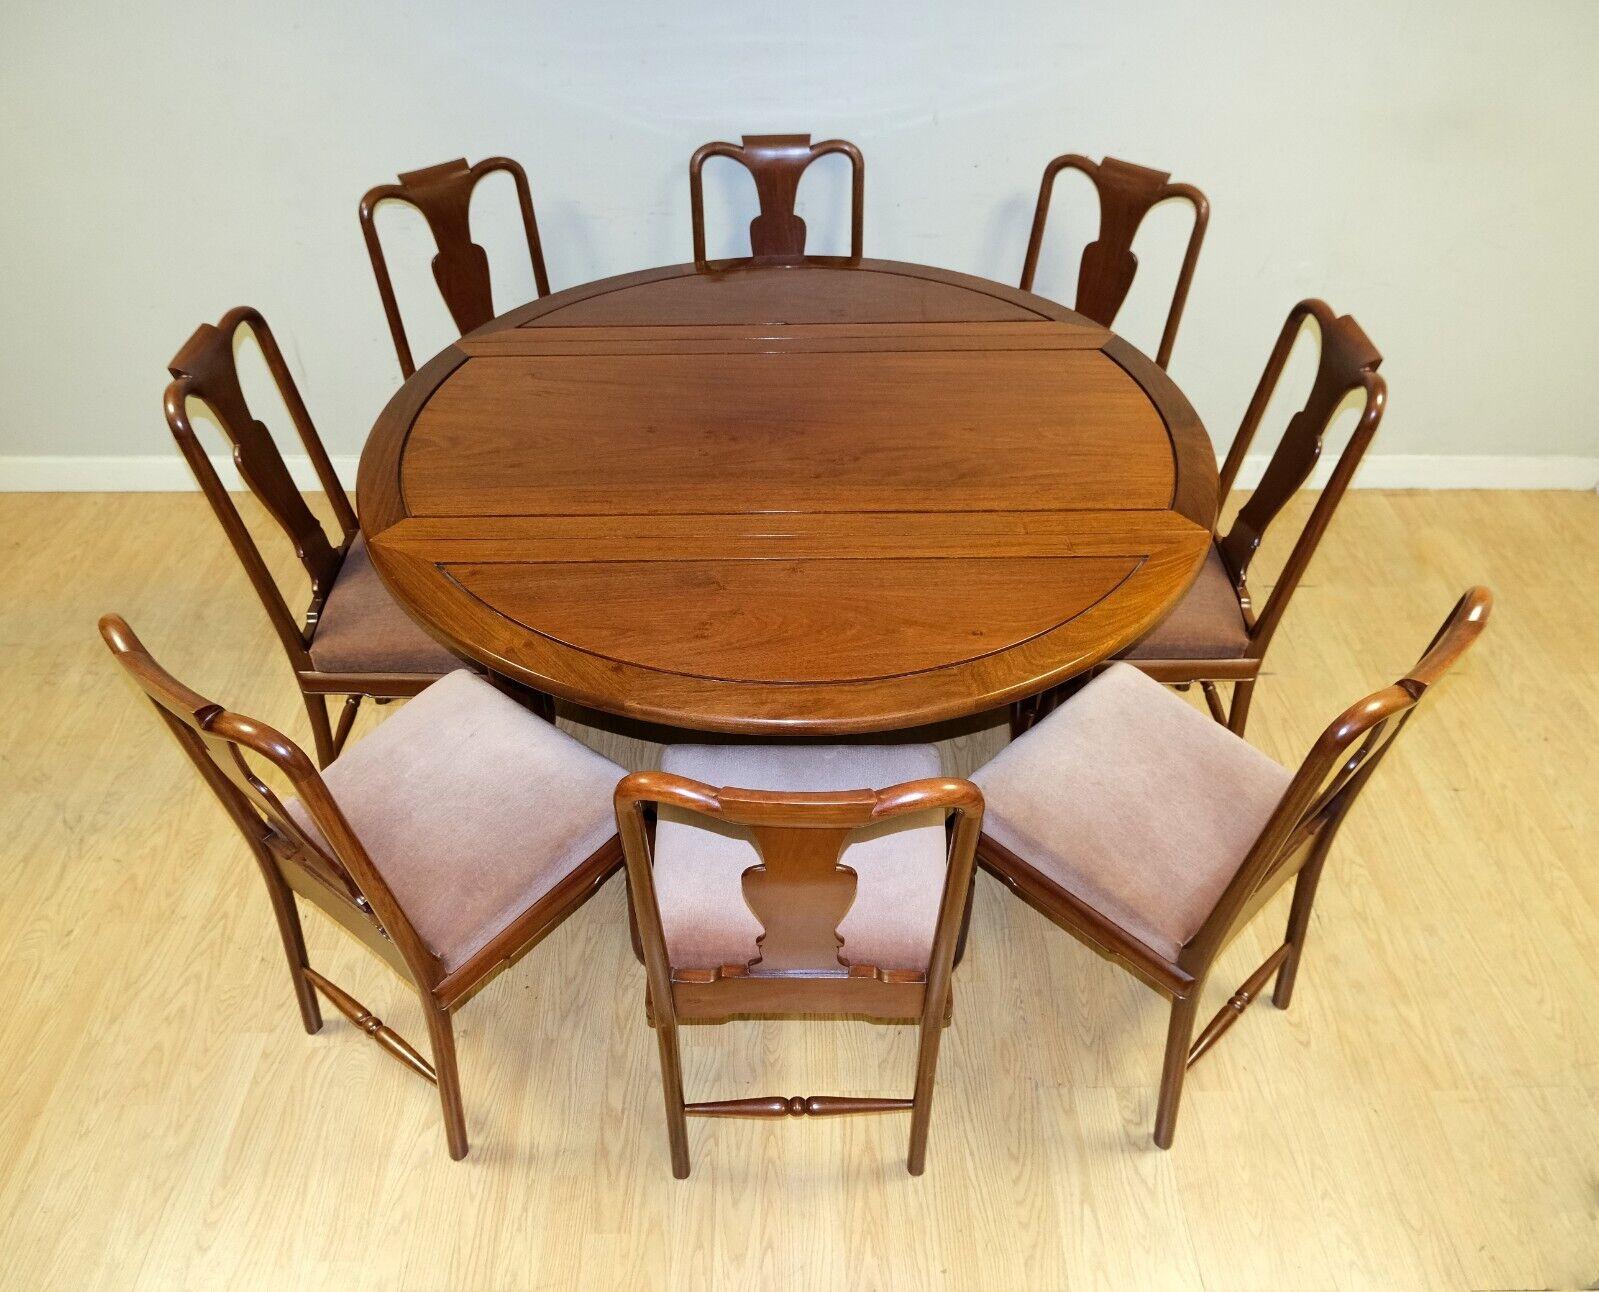 20th Century Chinese Hardwood Drop Leaf Dining Table Claw & Ball Feet Set of Eight Chairs